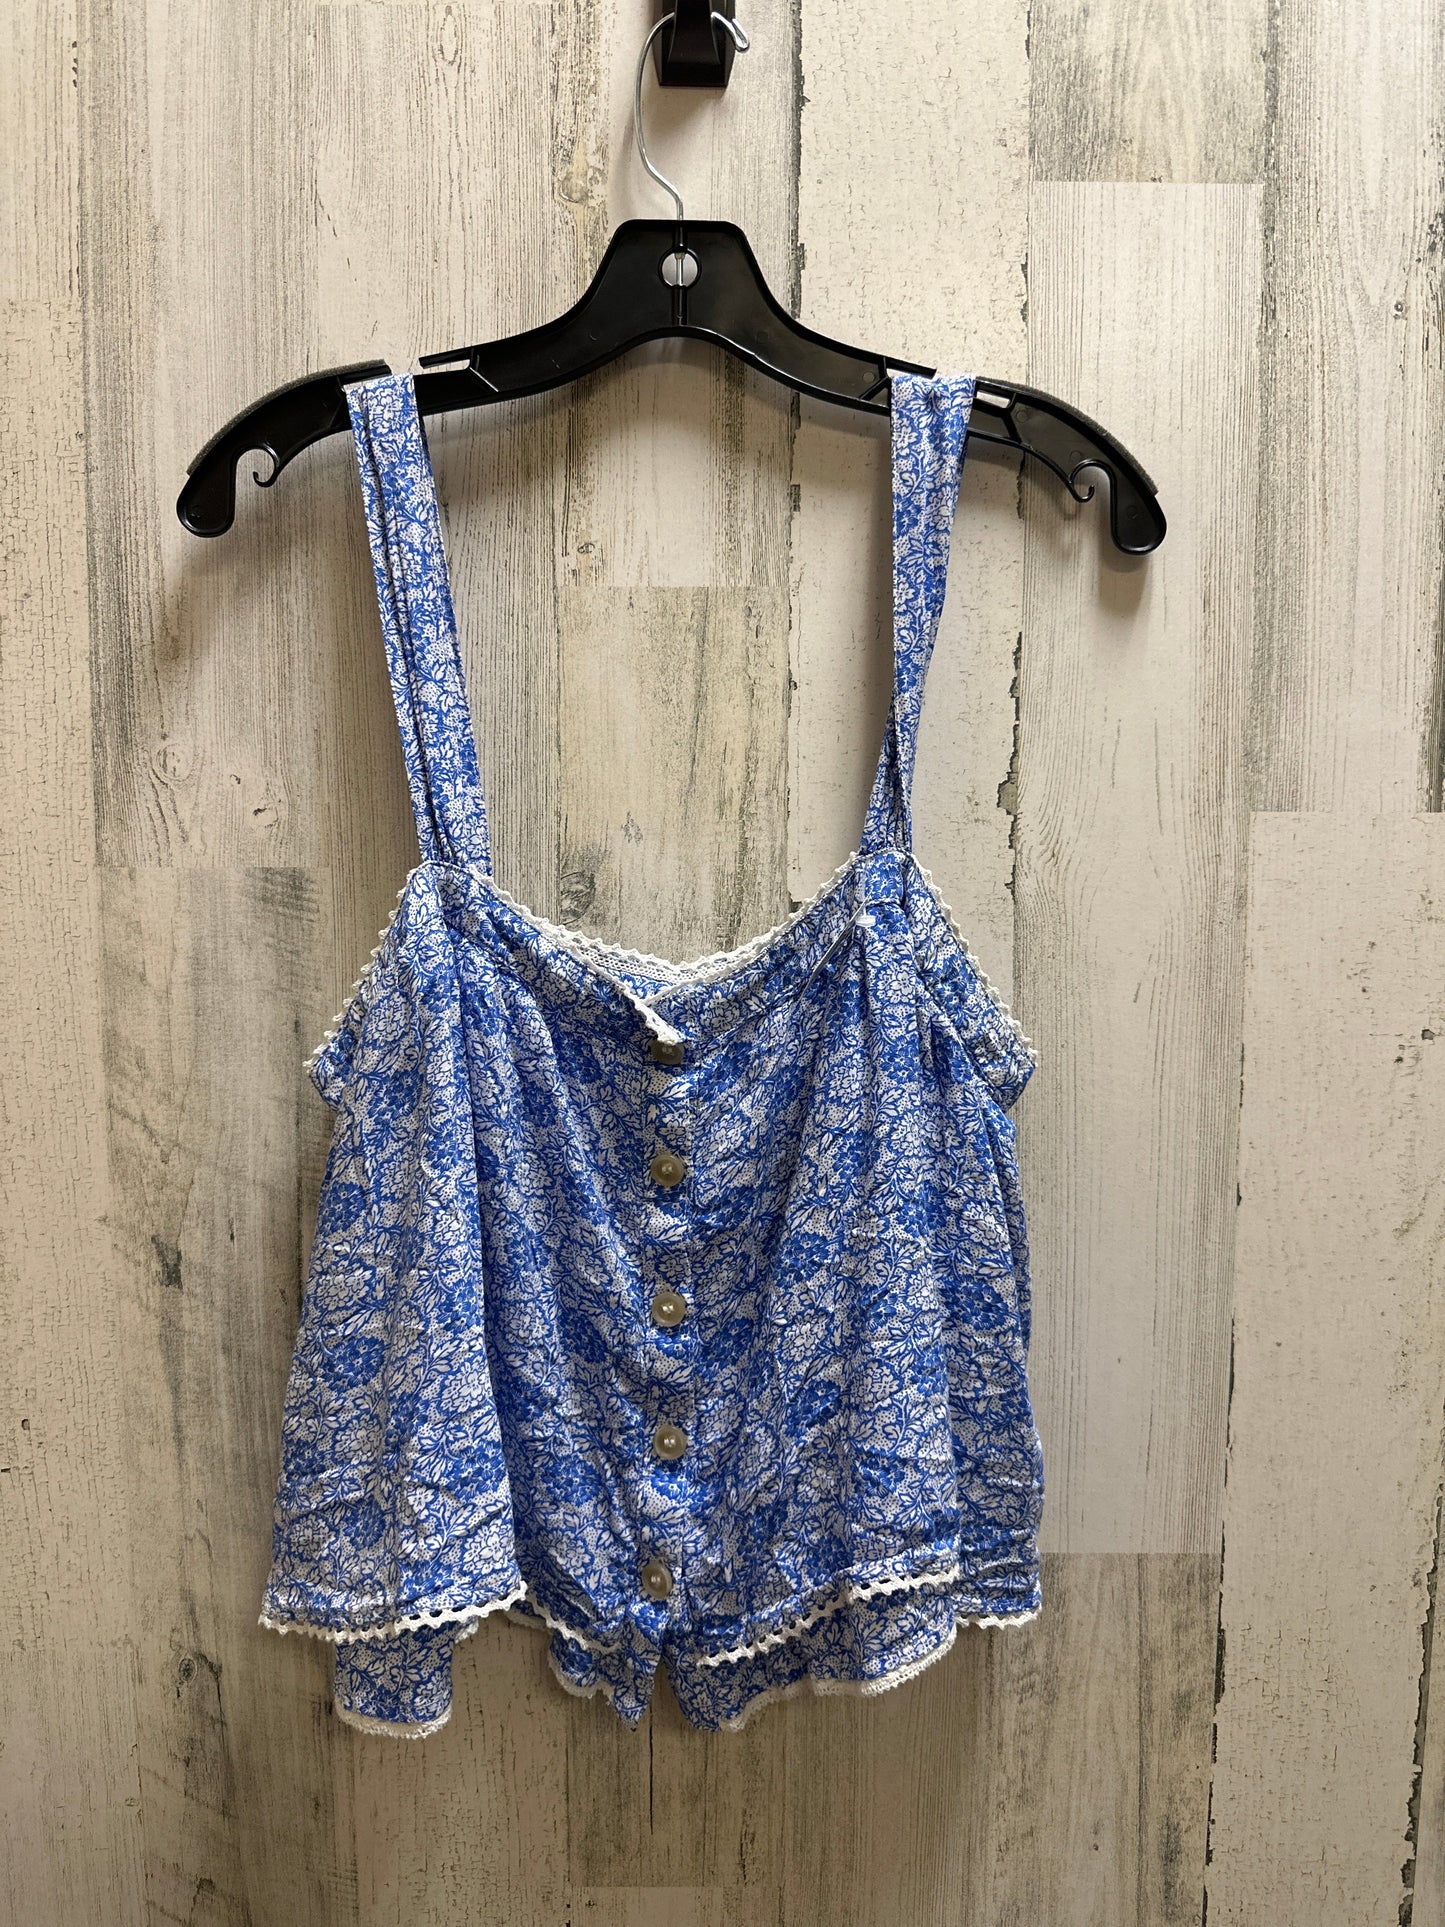 Blue Top Sleeveless Free People, Size M